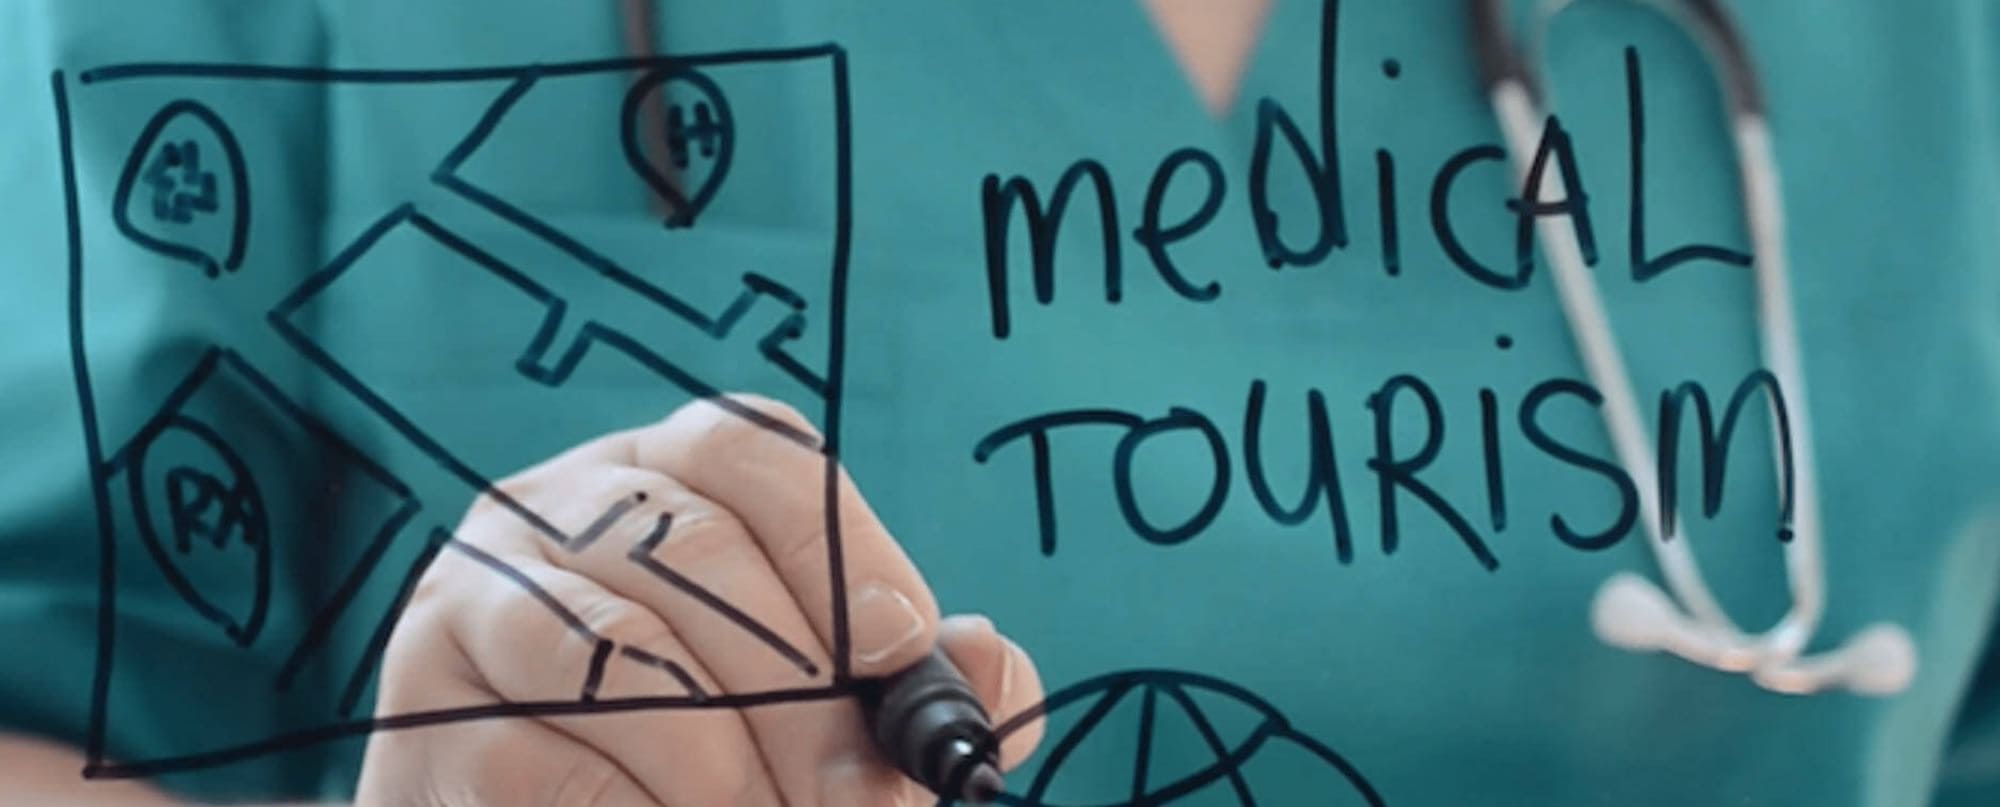 You are invited to Turkey for medical tourism for healthcare